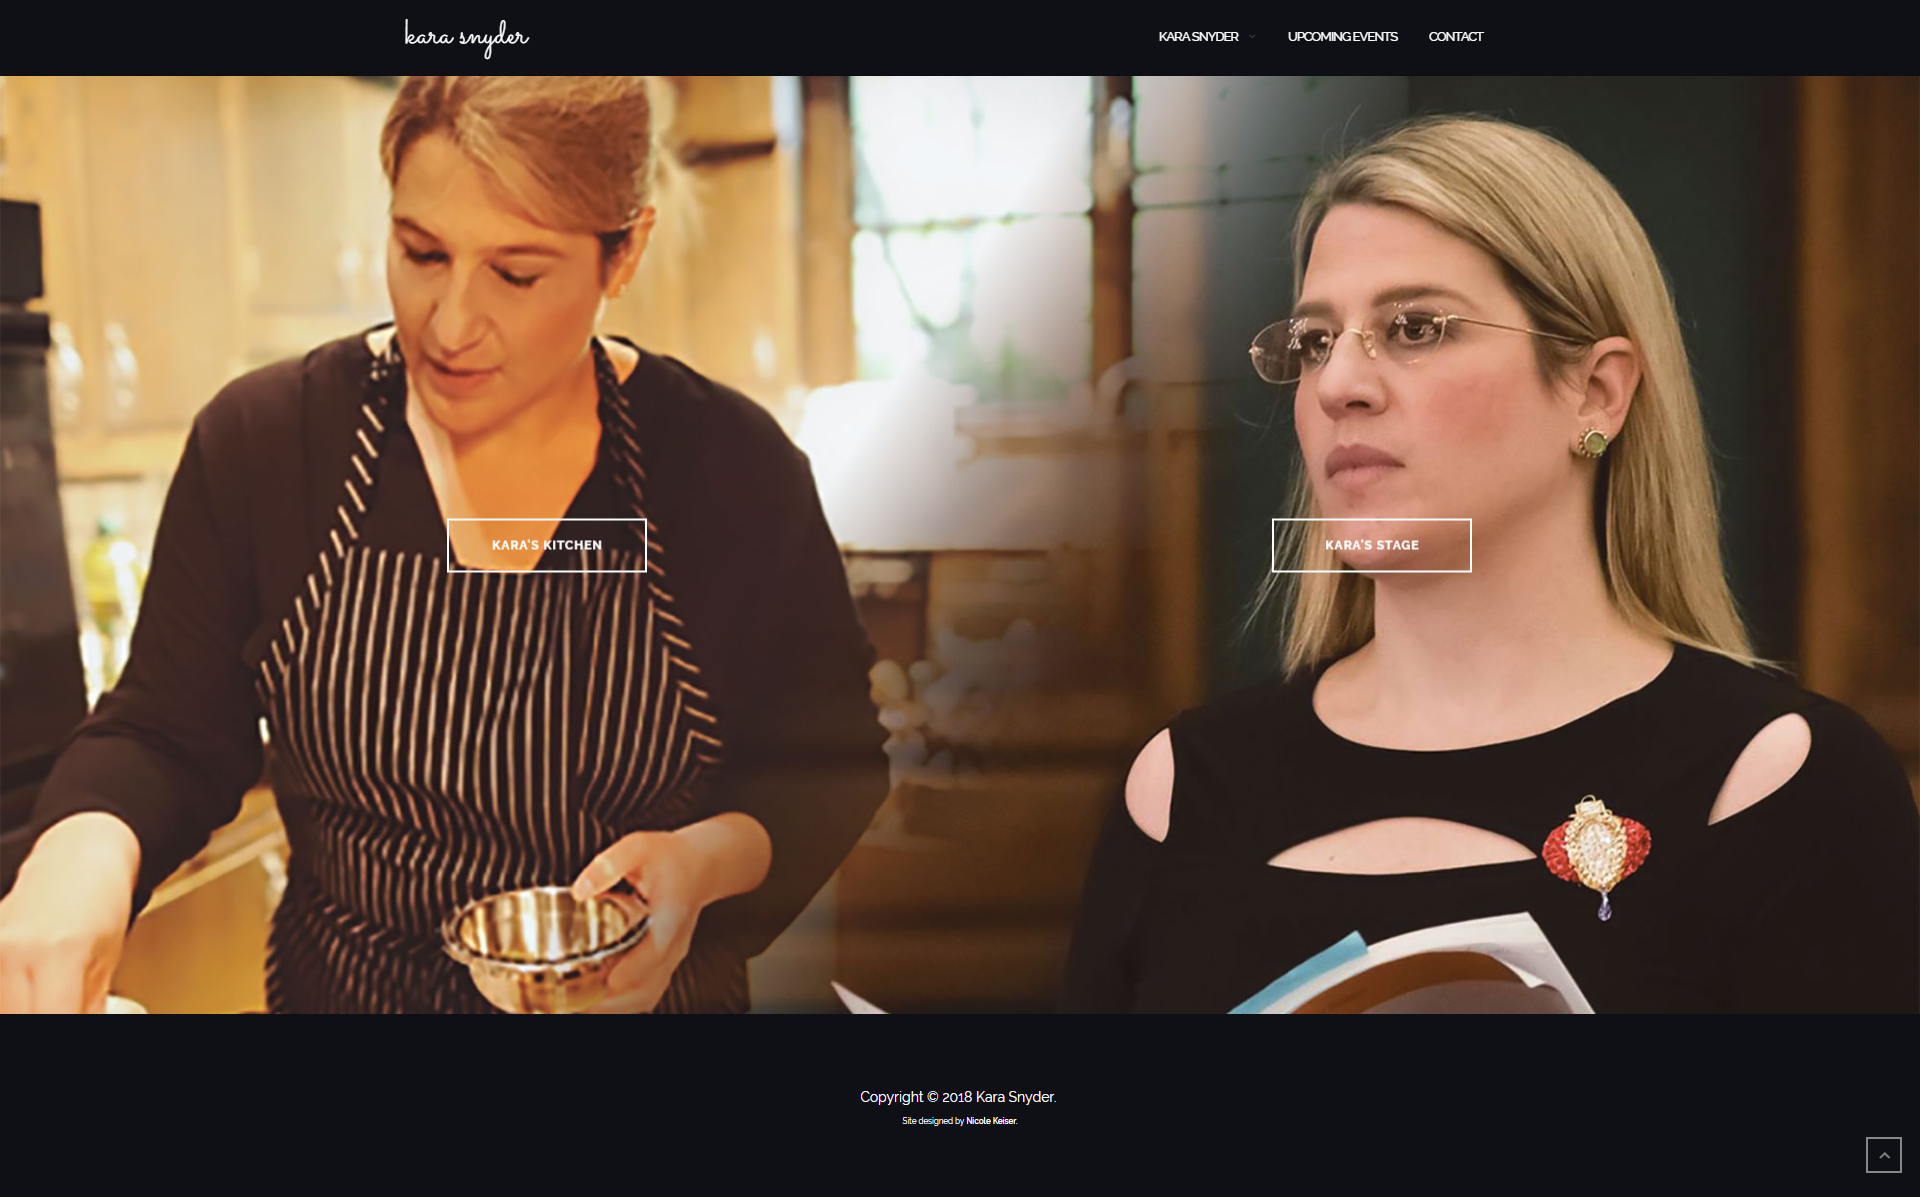 A screenshot of a web page for Kara Snyder's personal website - the homepage features two photos of her side by side